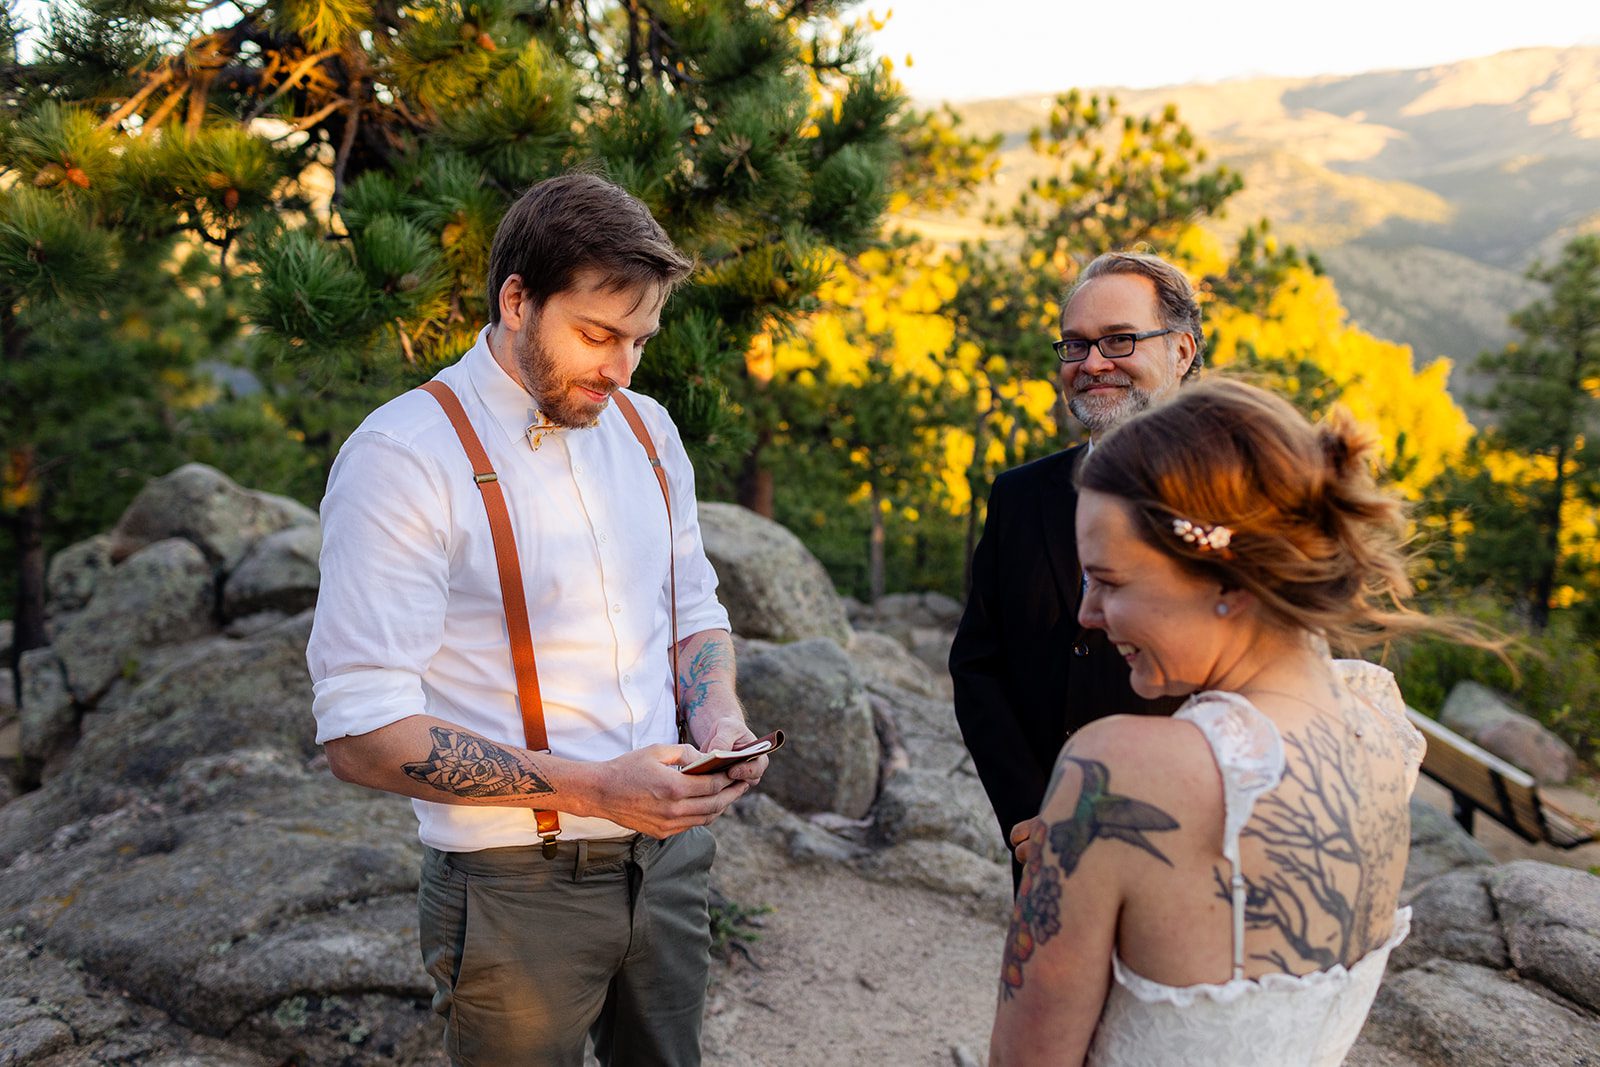 bride giggling as groom reads his vows during Sunrise Elopement at Artist Point